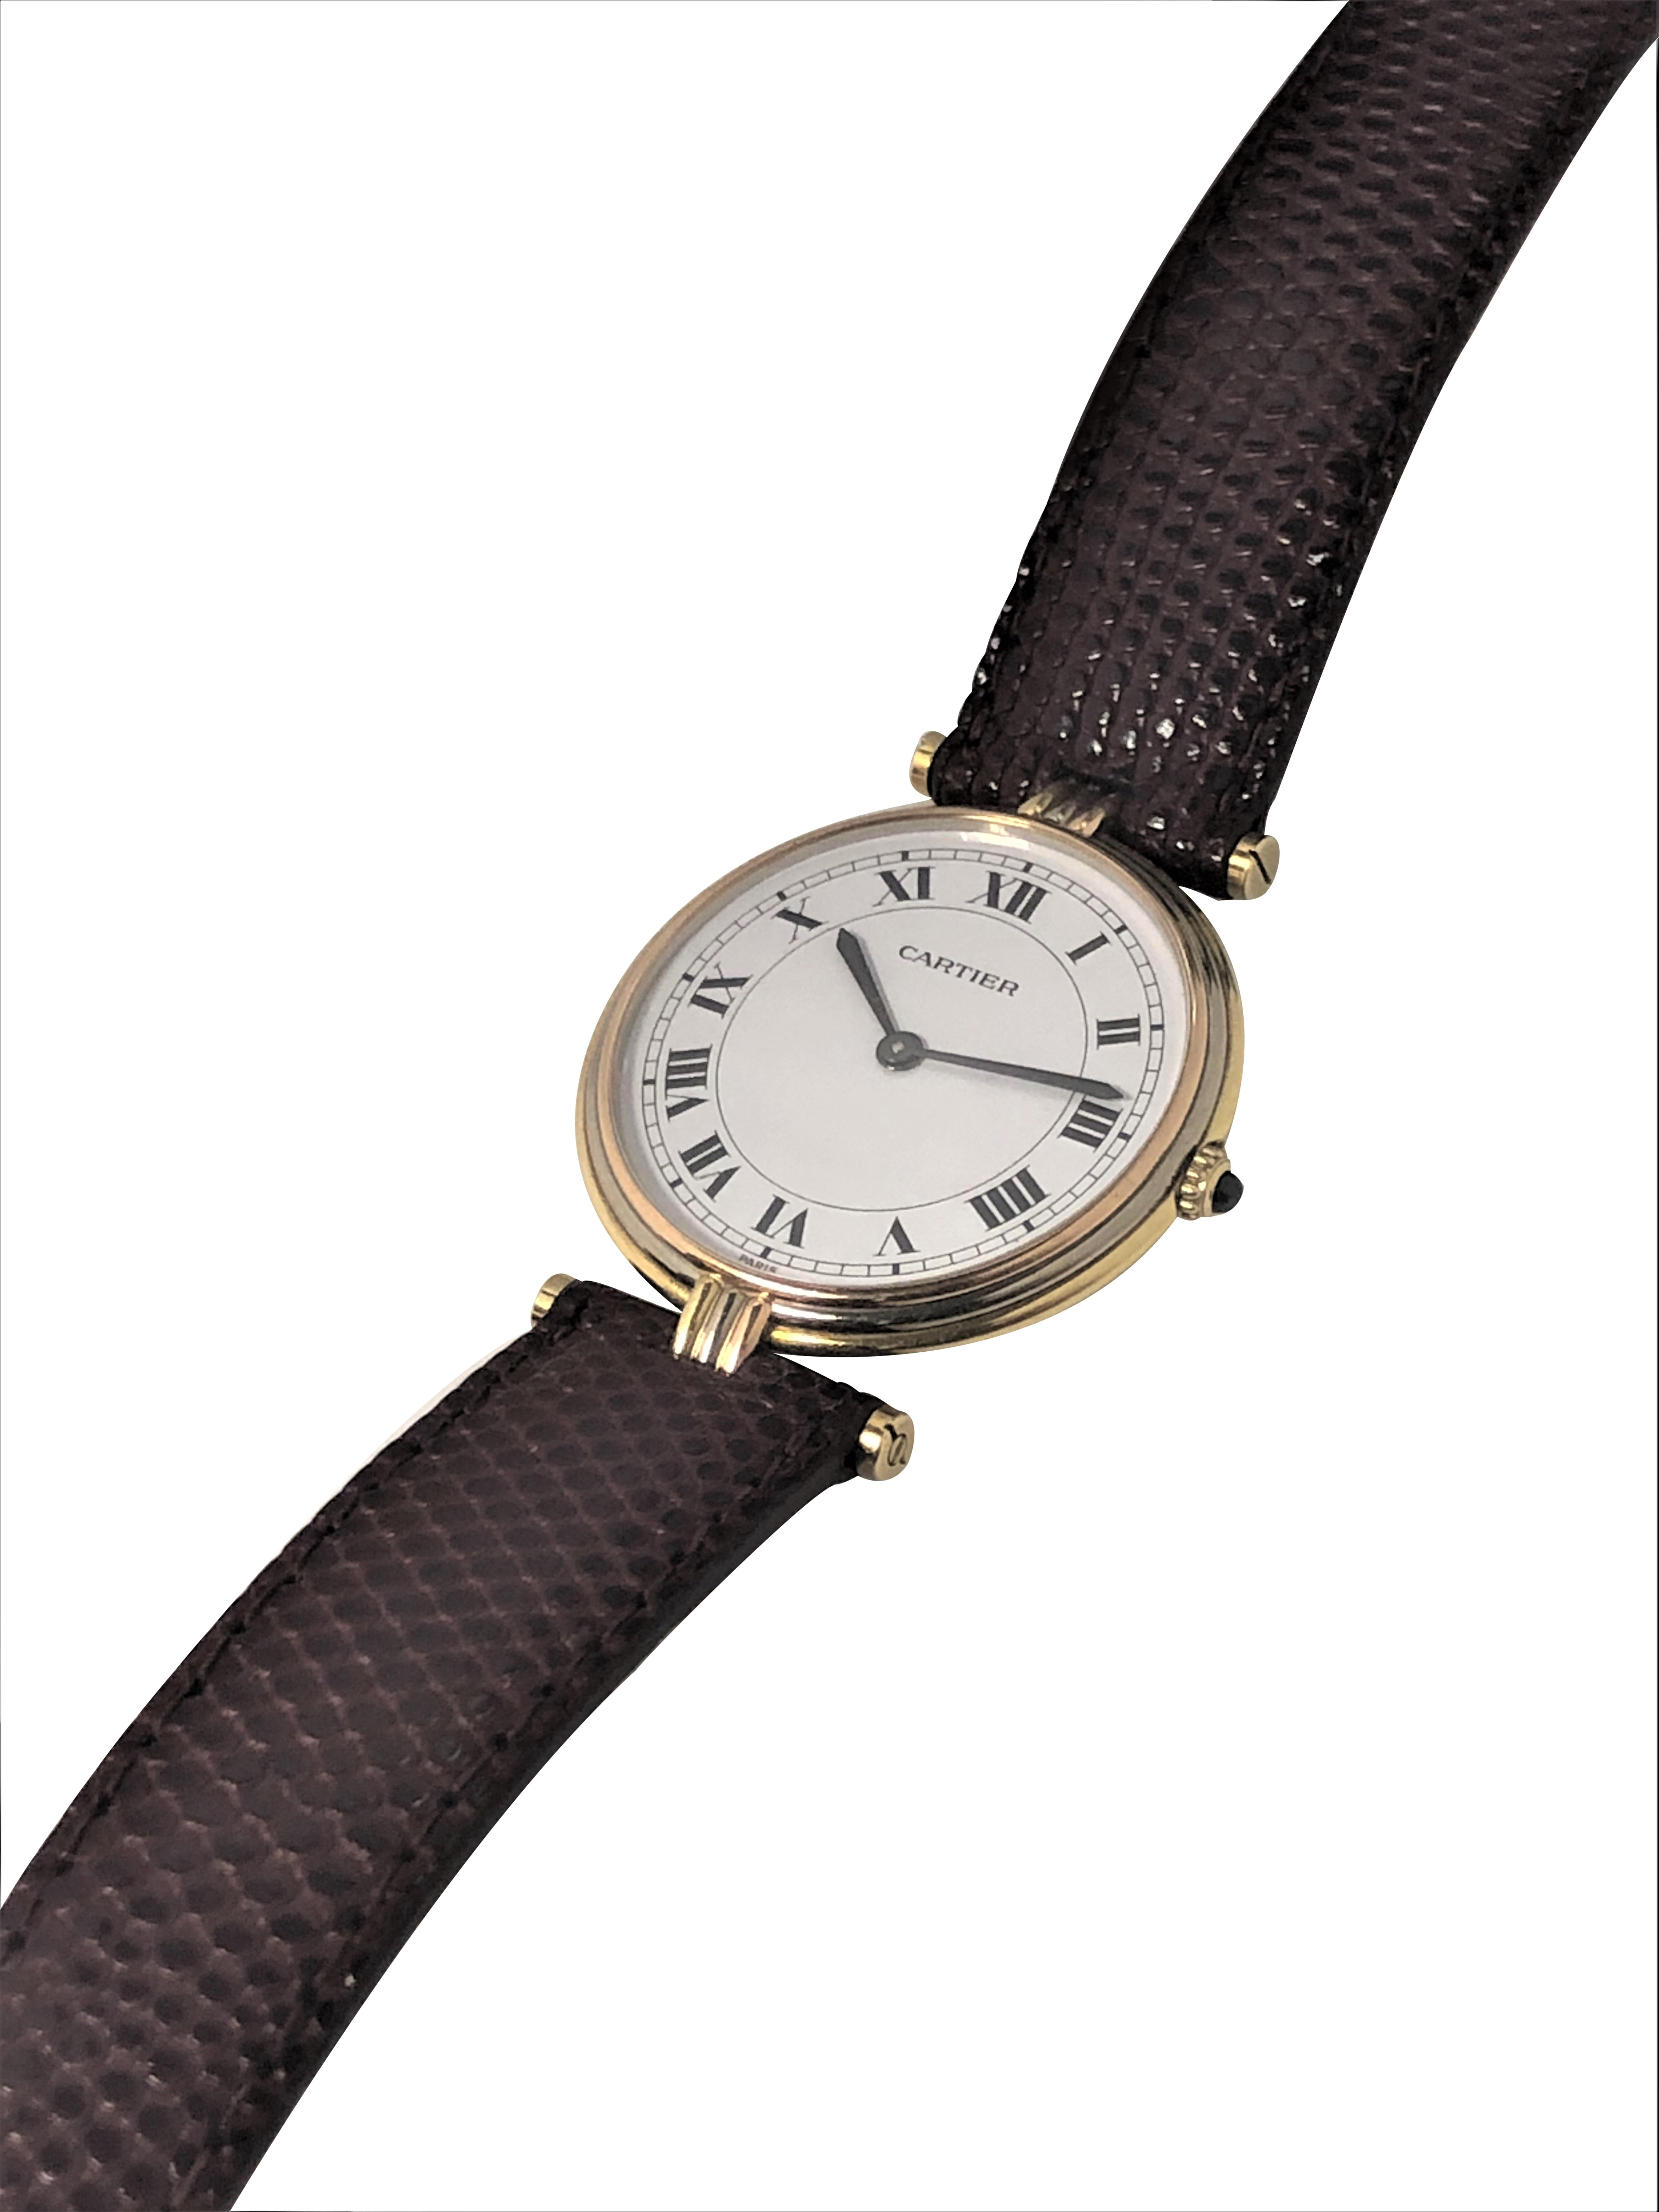 Circa 2000 Trinity Vendome collection Wrist Watch, 30 M.M. Diameter 18K Yellow, Pink and White Gold 2 Piece stepped case. Quartz movement, Sapphire set Crown, White Dial with Black Roman numerals. Original Cartier Brown Lizard Strap with Cartier